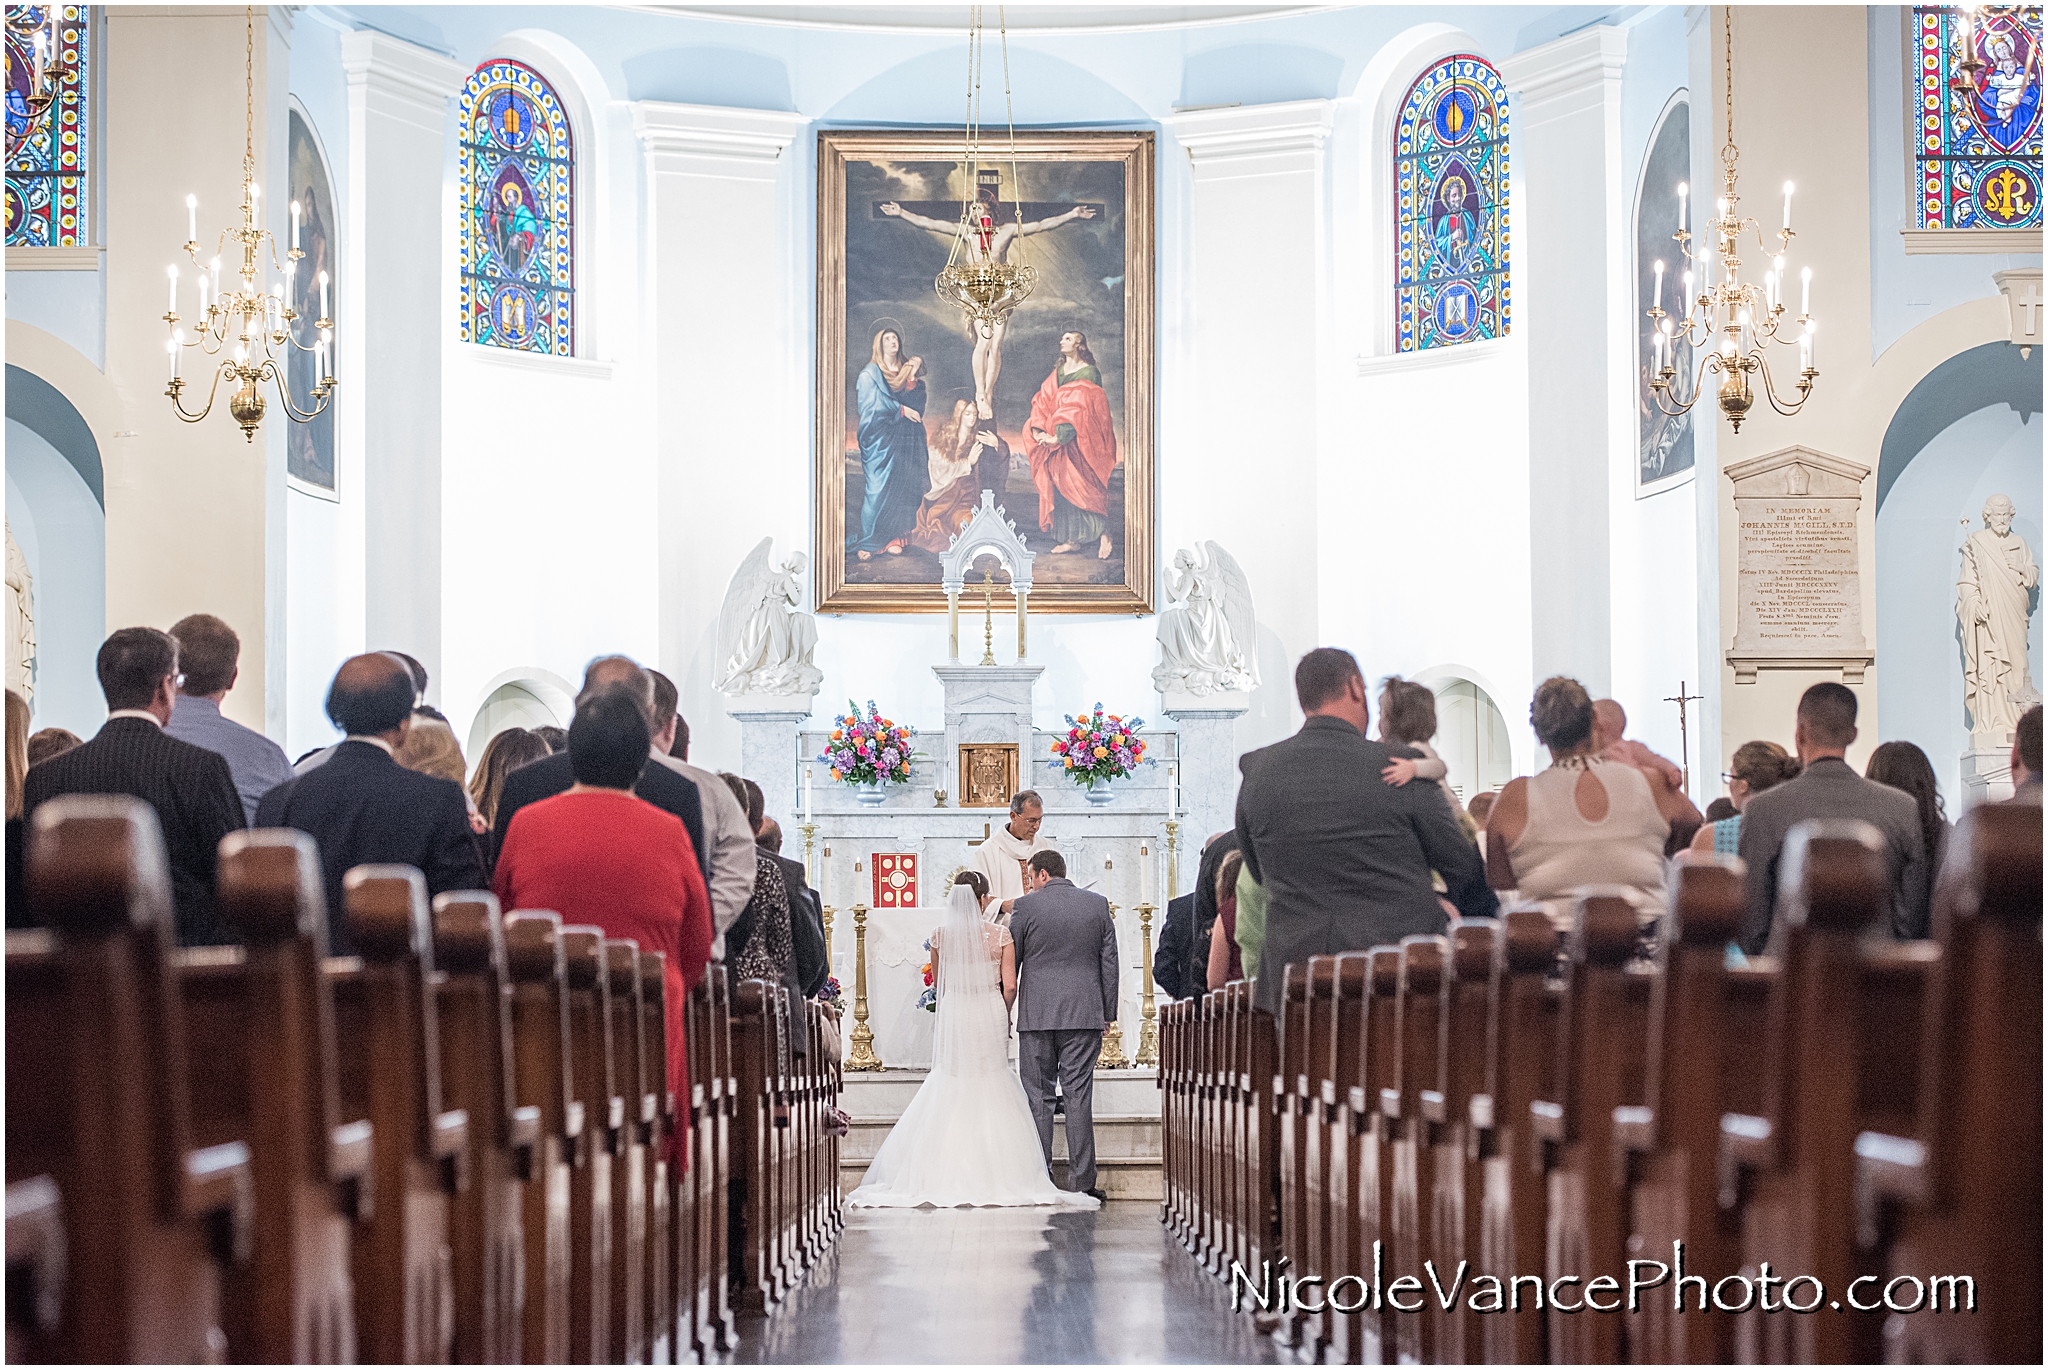 The wedding ceremony takes place at the beautiful and historic St Peter's Catholic Church in Richmond, Virginia.